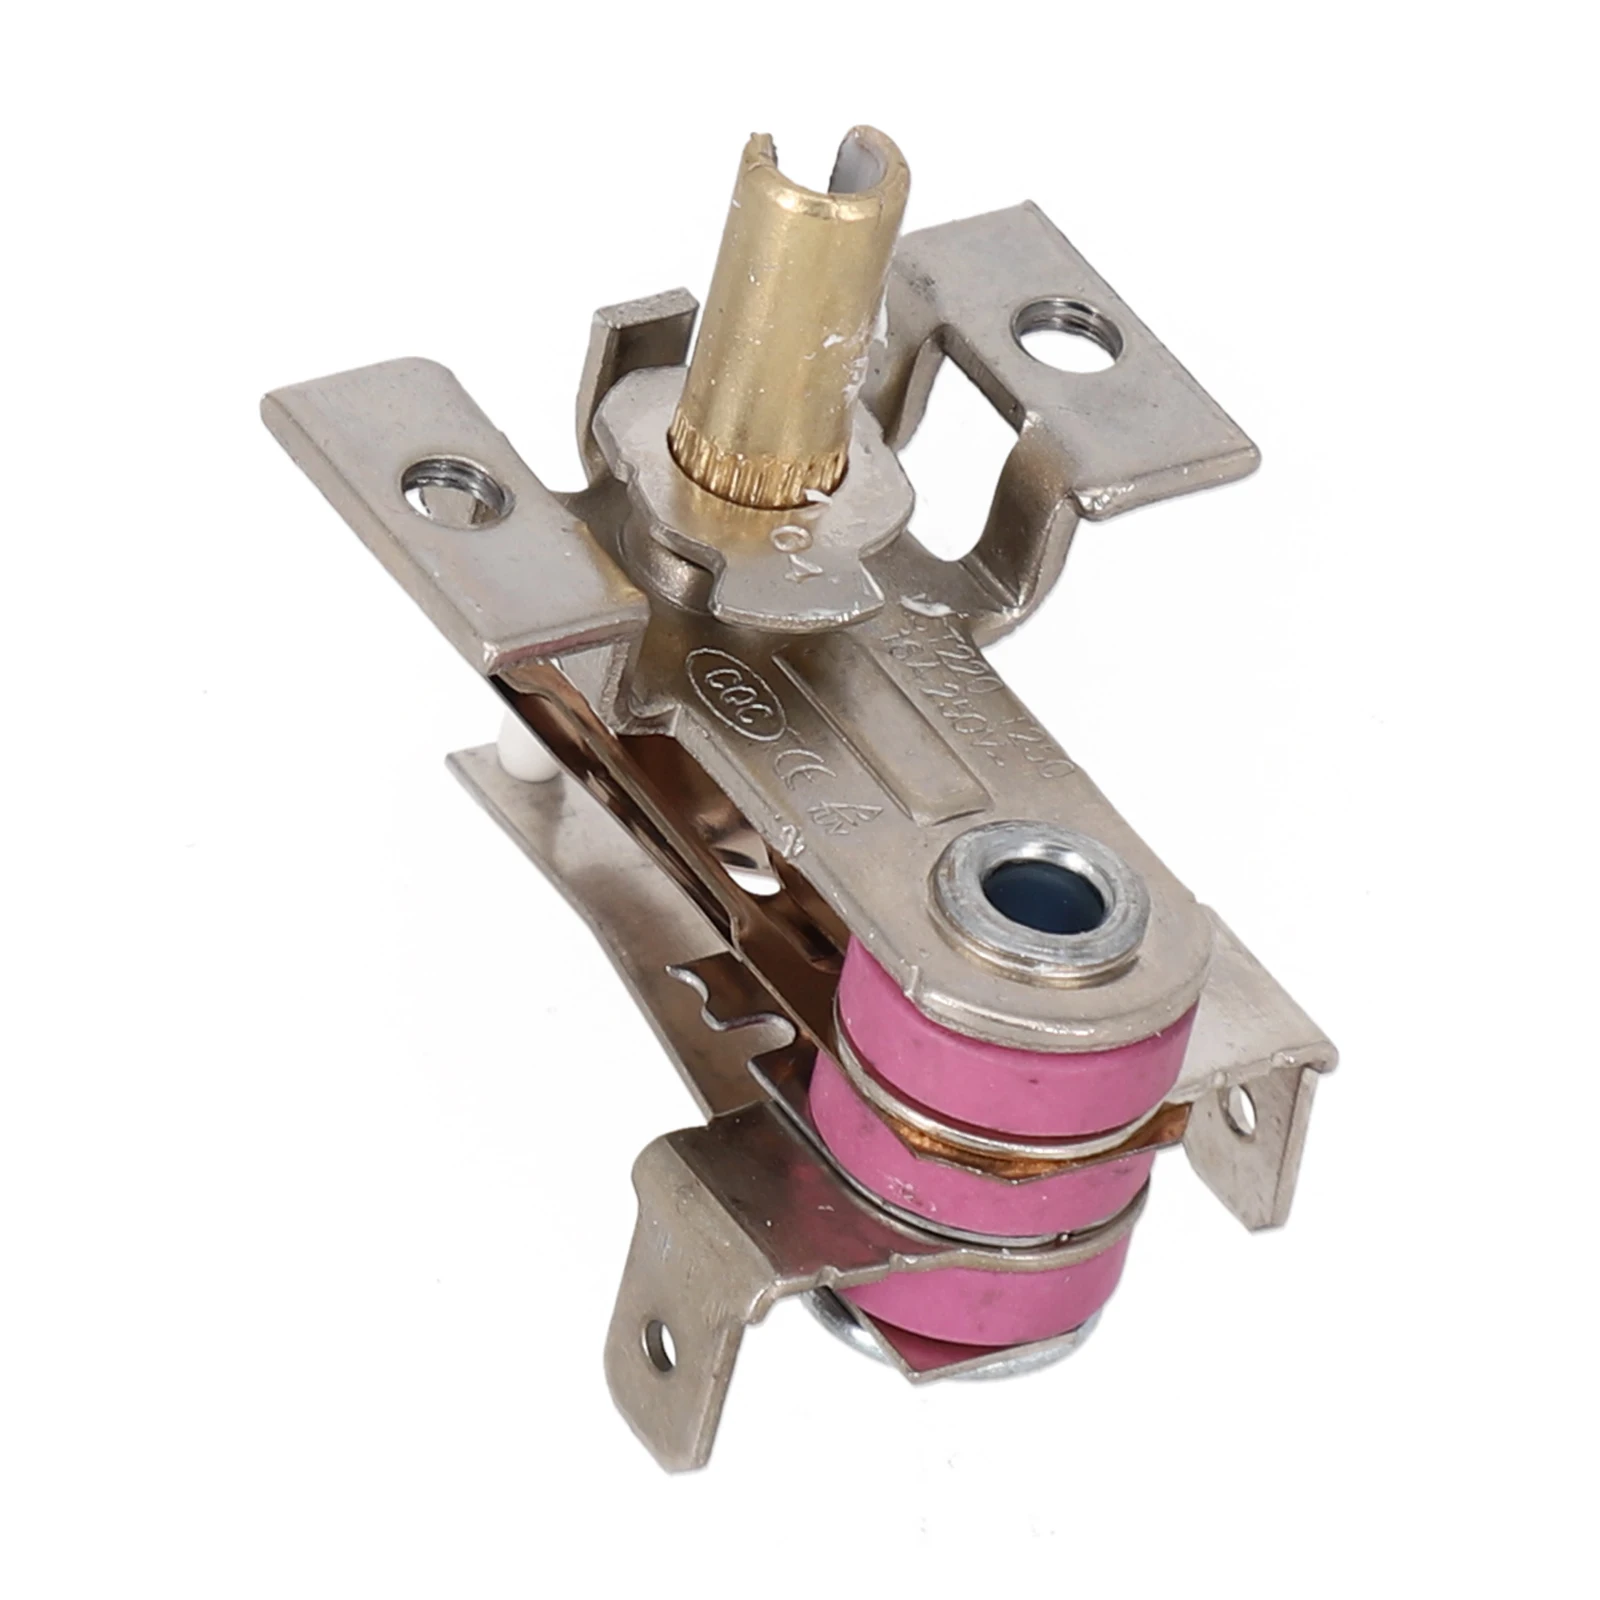 

1pc Temperature Switch Thermostat Switch Adjustable Heating Bimetal Thermostat KST-168 Replacement Parts For Electric Heaters